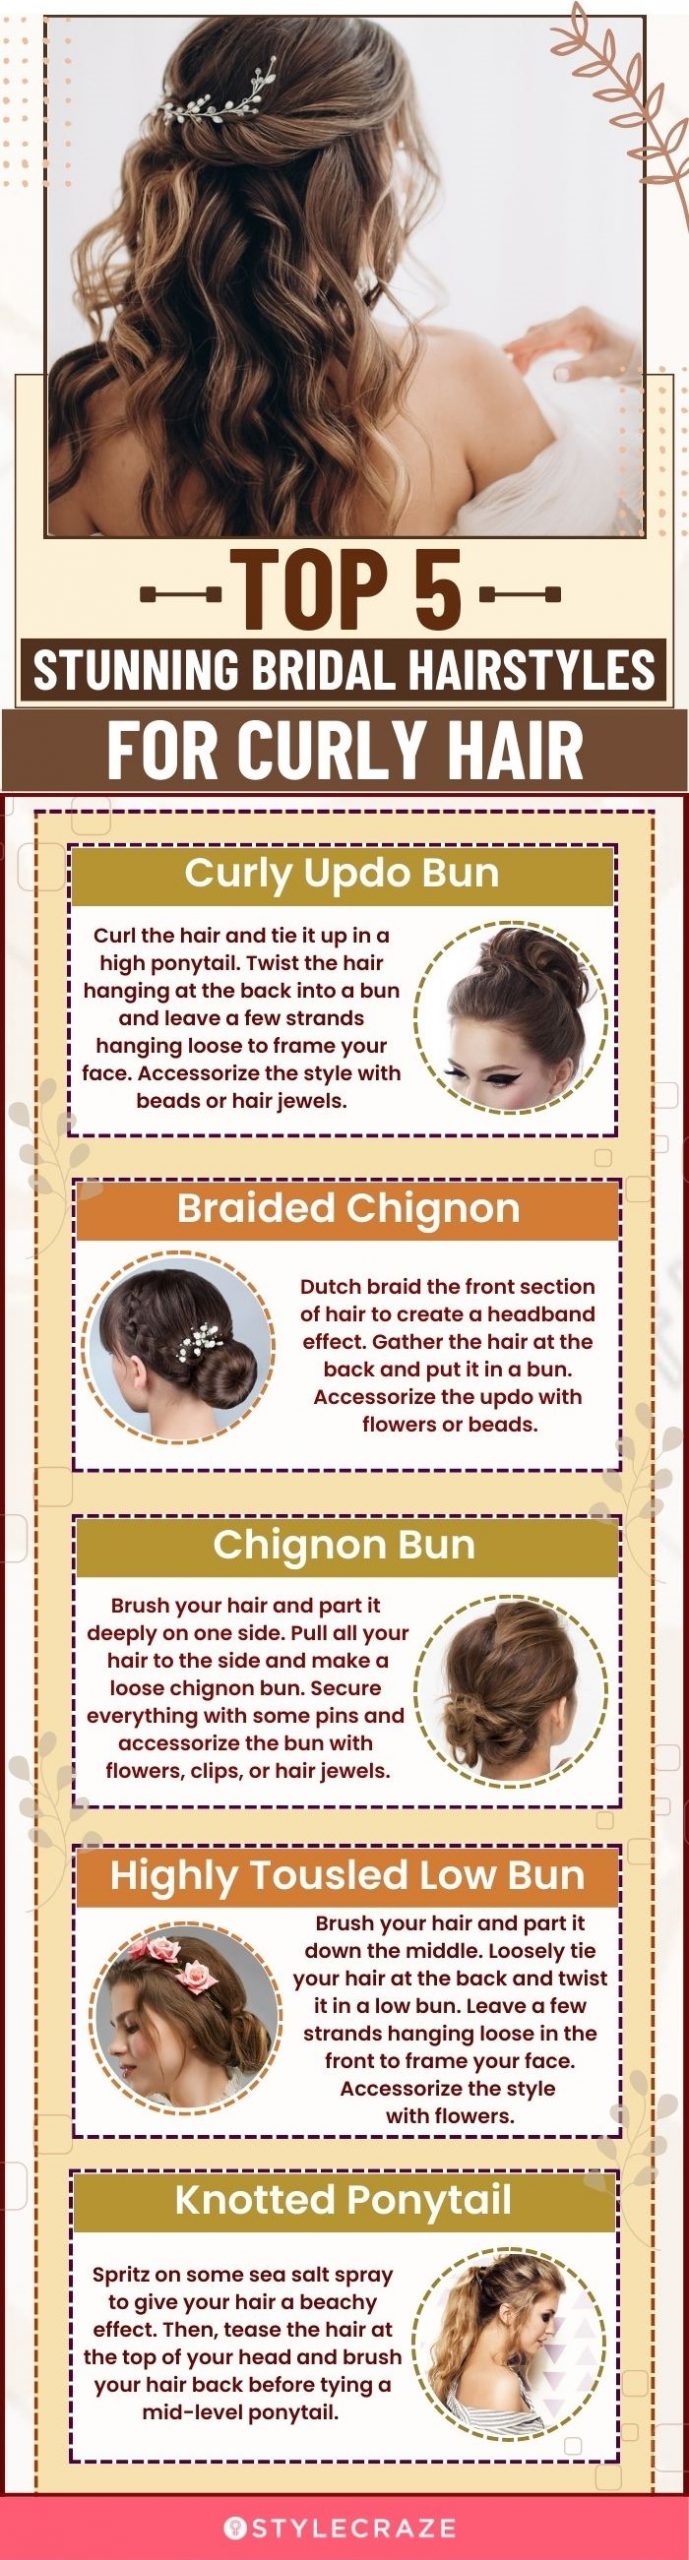 top 5 stunning bridal hairstyles for curly hairs (infographic)